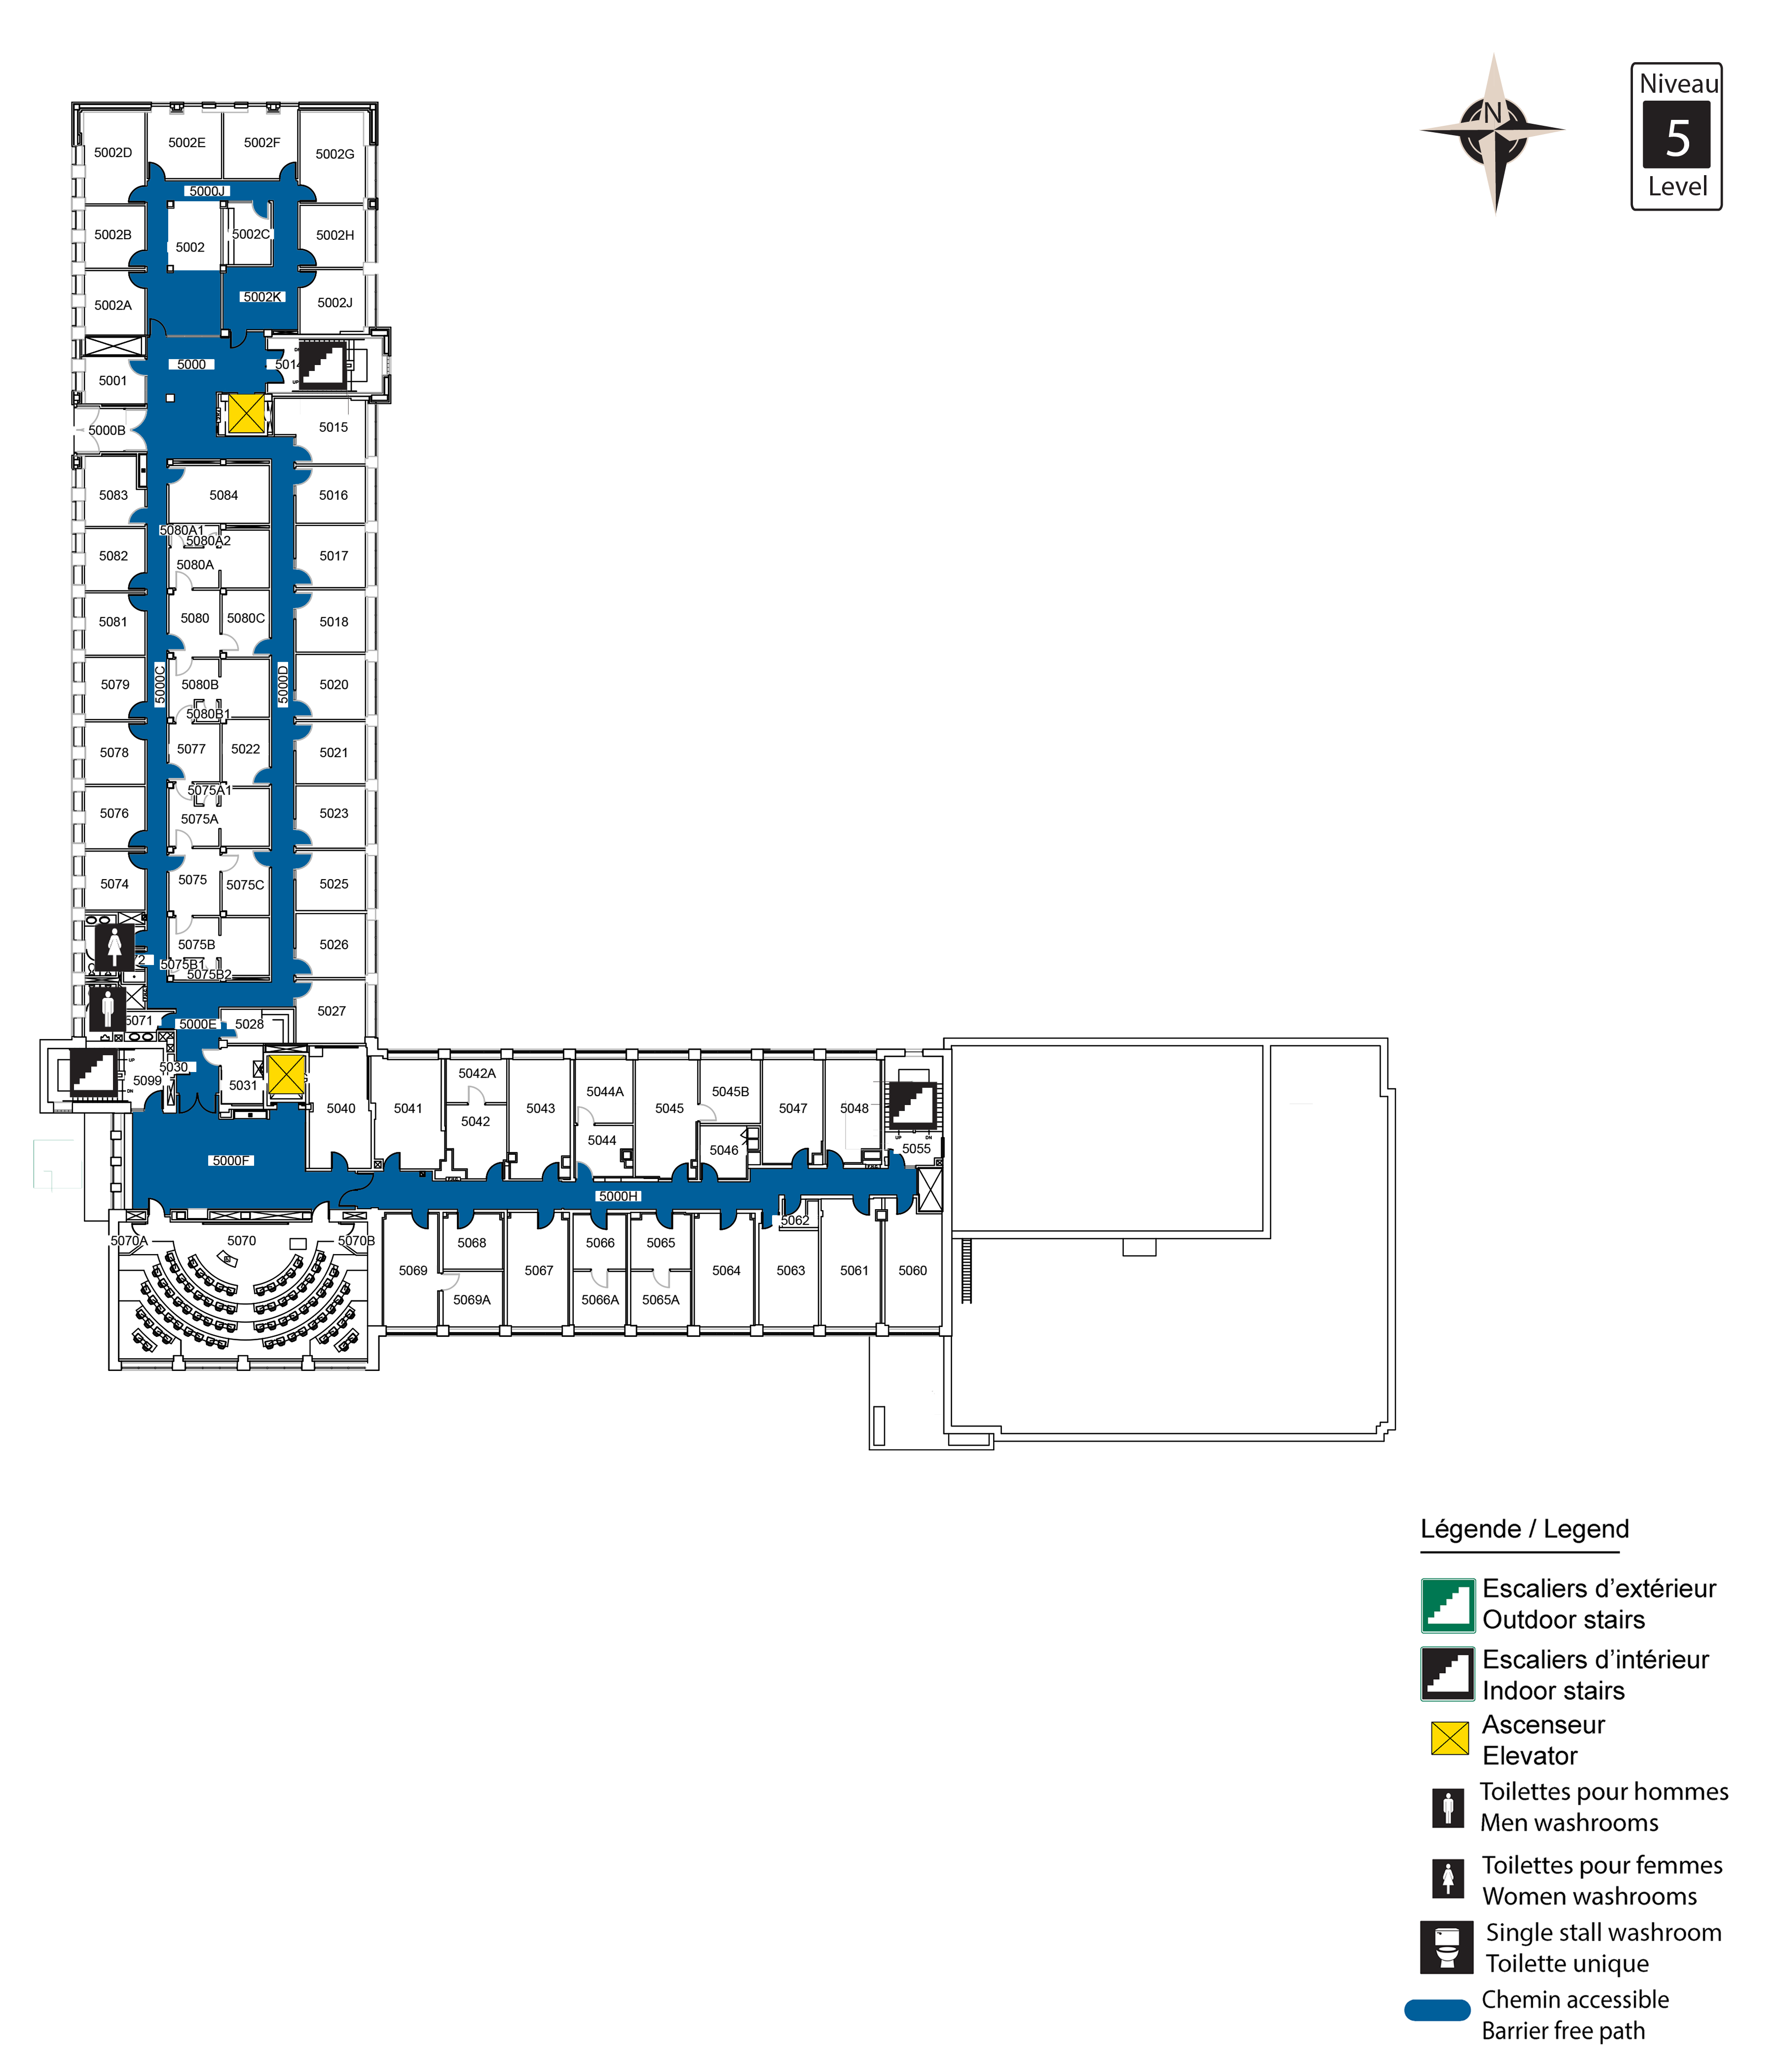 Accessible map of VNR level 5